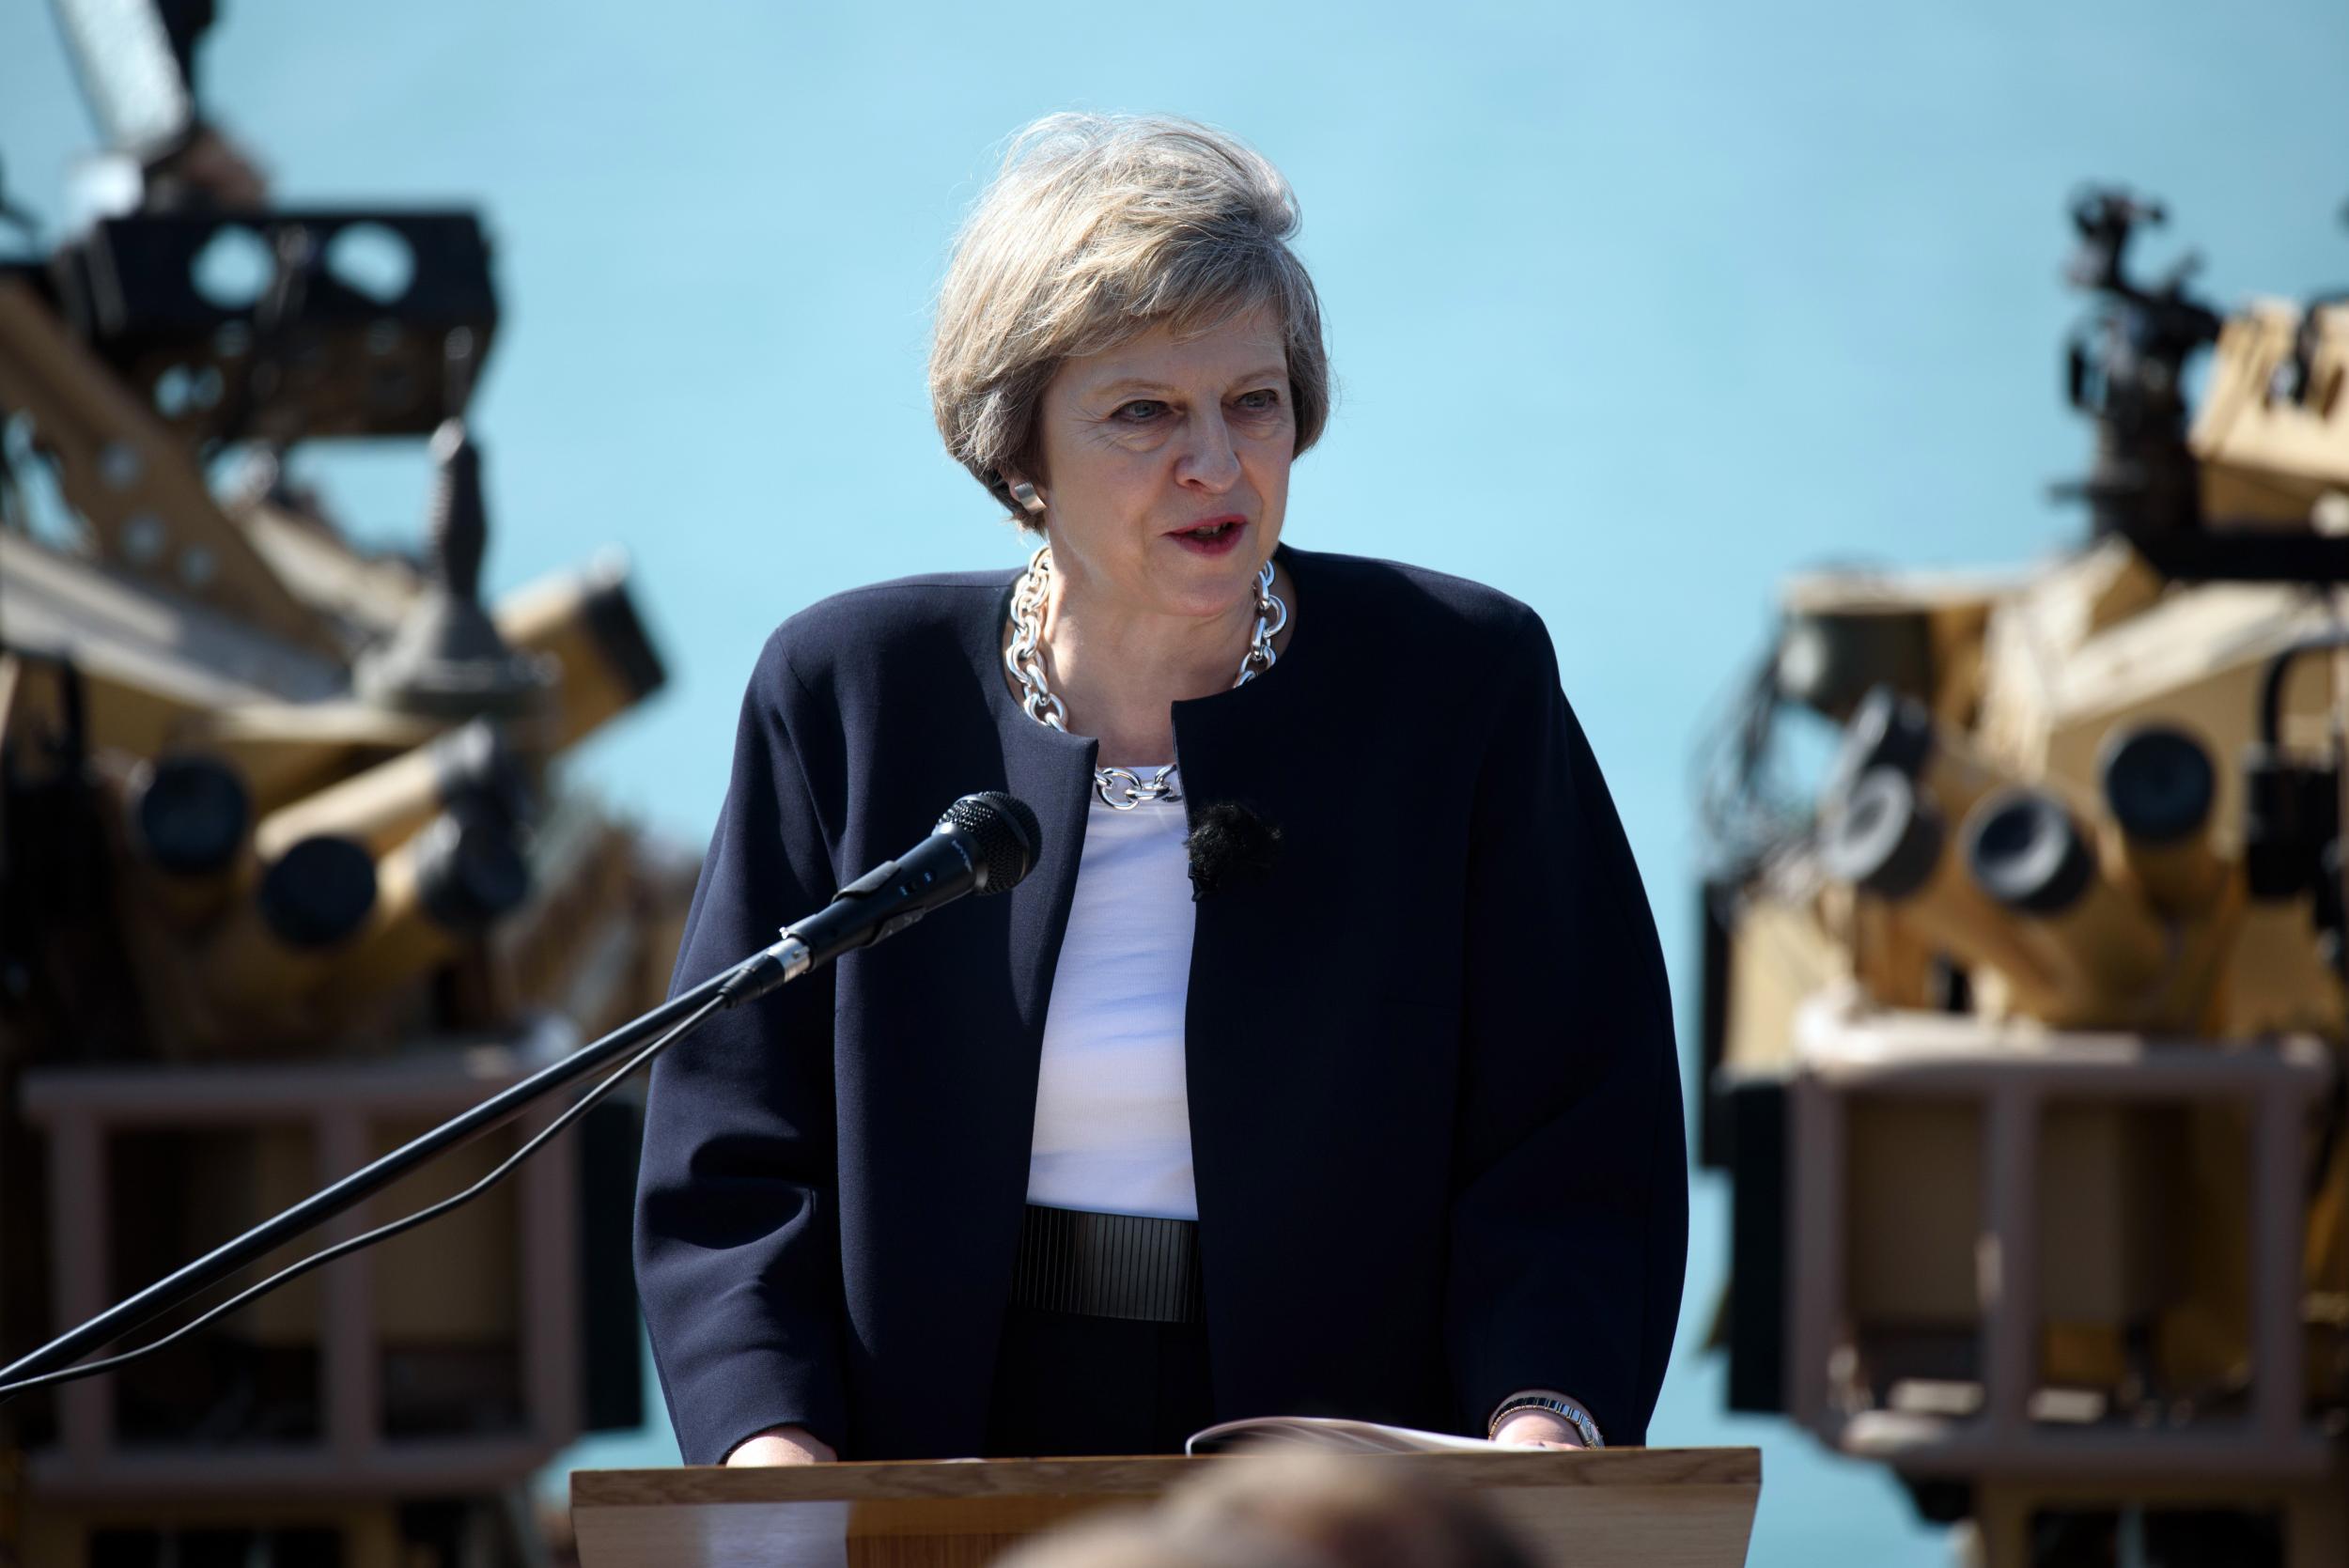 Theresa May addresses sailors on board HMS Ocean during her trip to attend the Gulf Cooperation Council summit in Bahrain